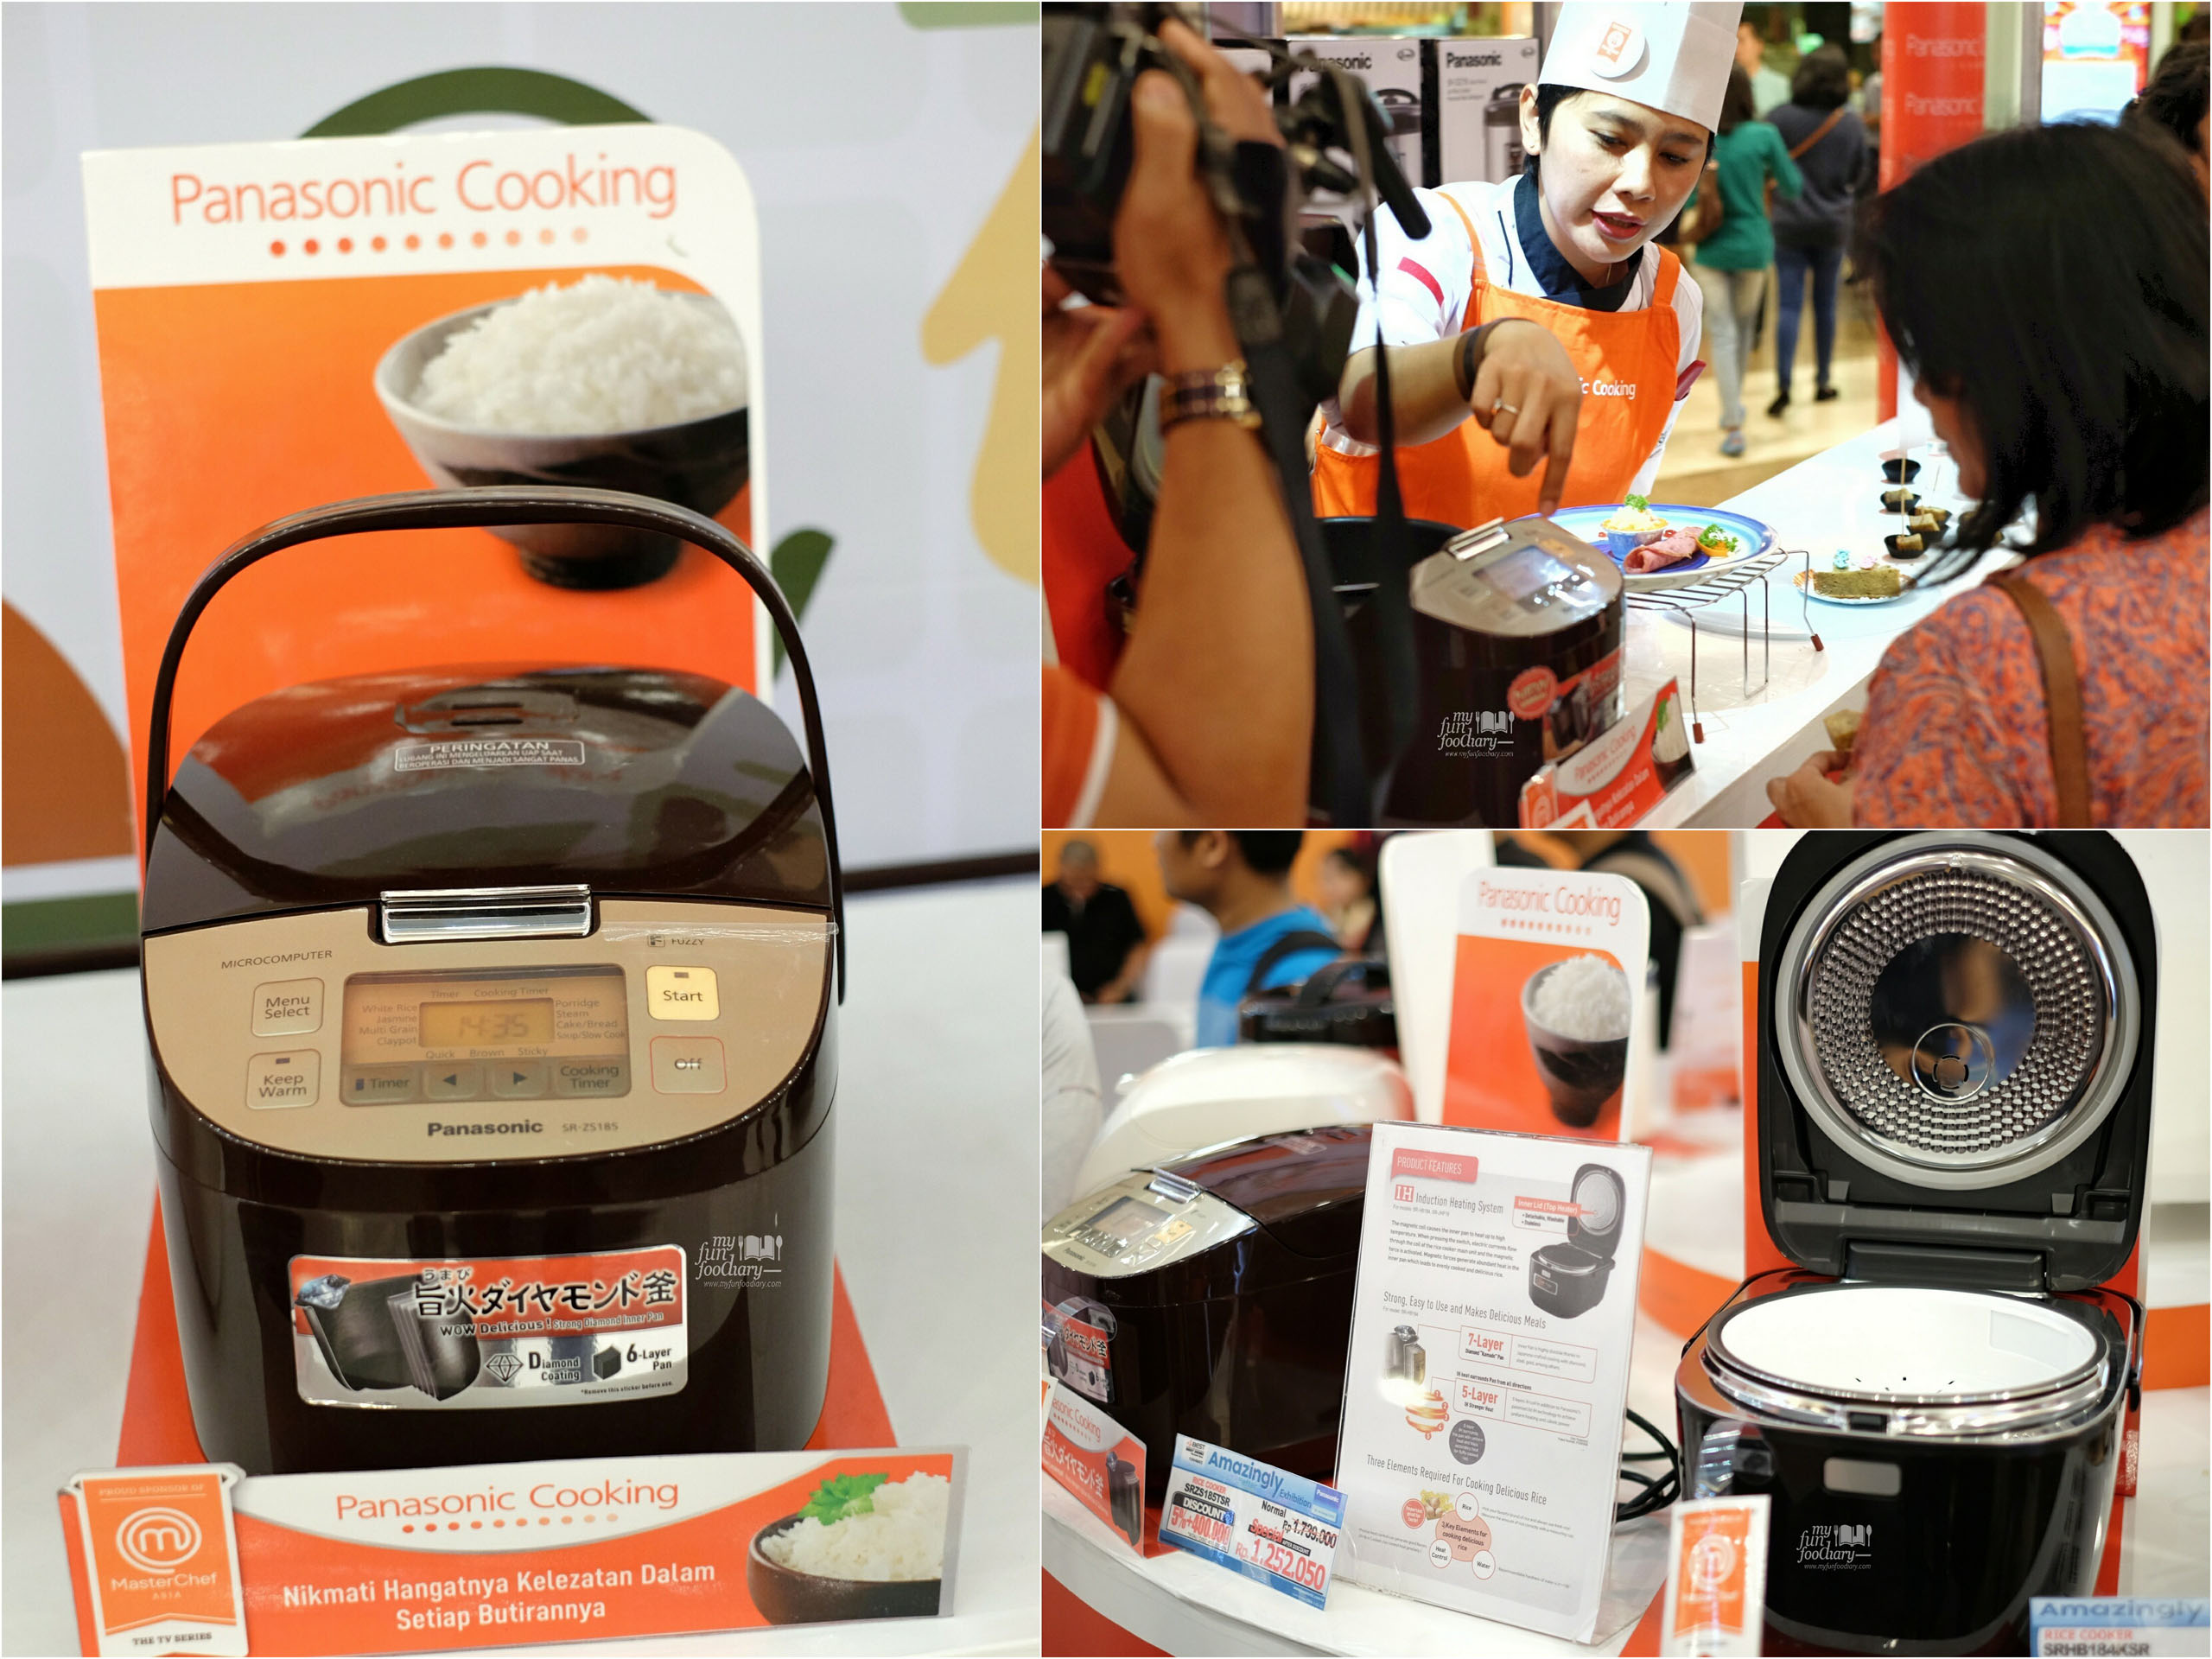 13 in 1 Rice Cooker Panasonic by Myfunfoodiary